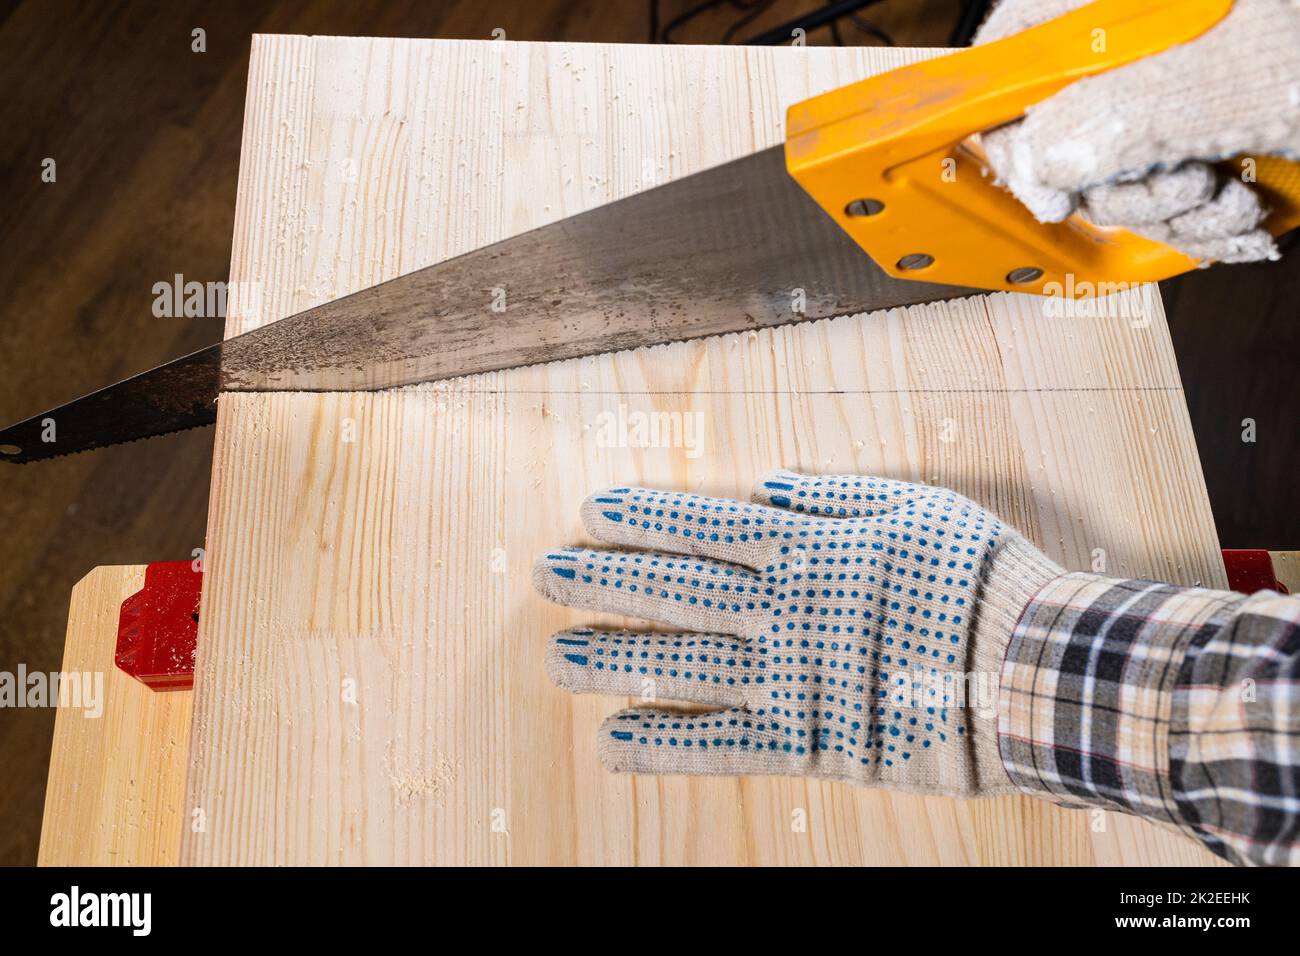 above view of carpenter hands sawing wooden board Stock Photo